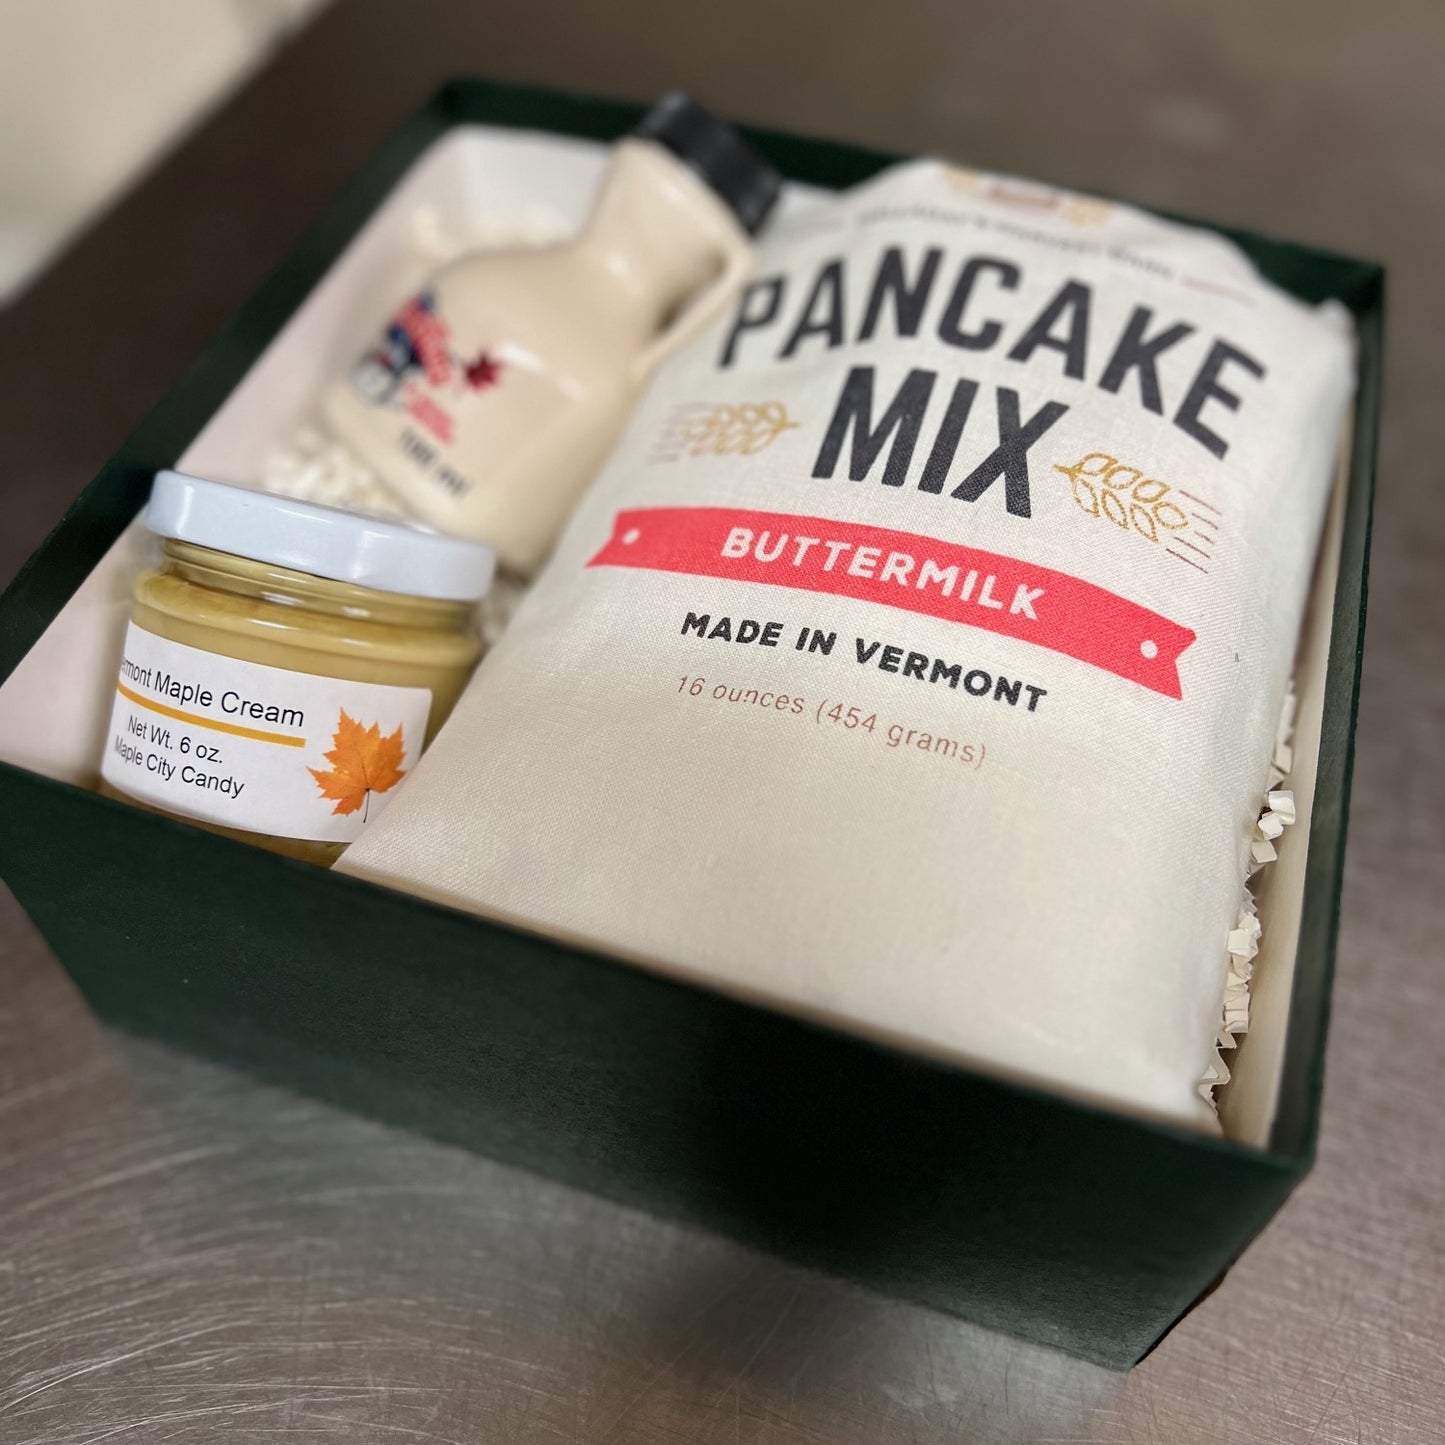 Buttermilk Pancakes SYRUP & MAPLE CREAM Gift Box